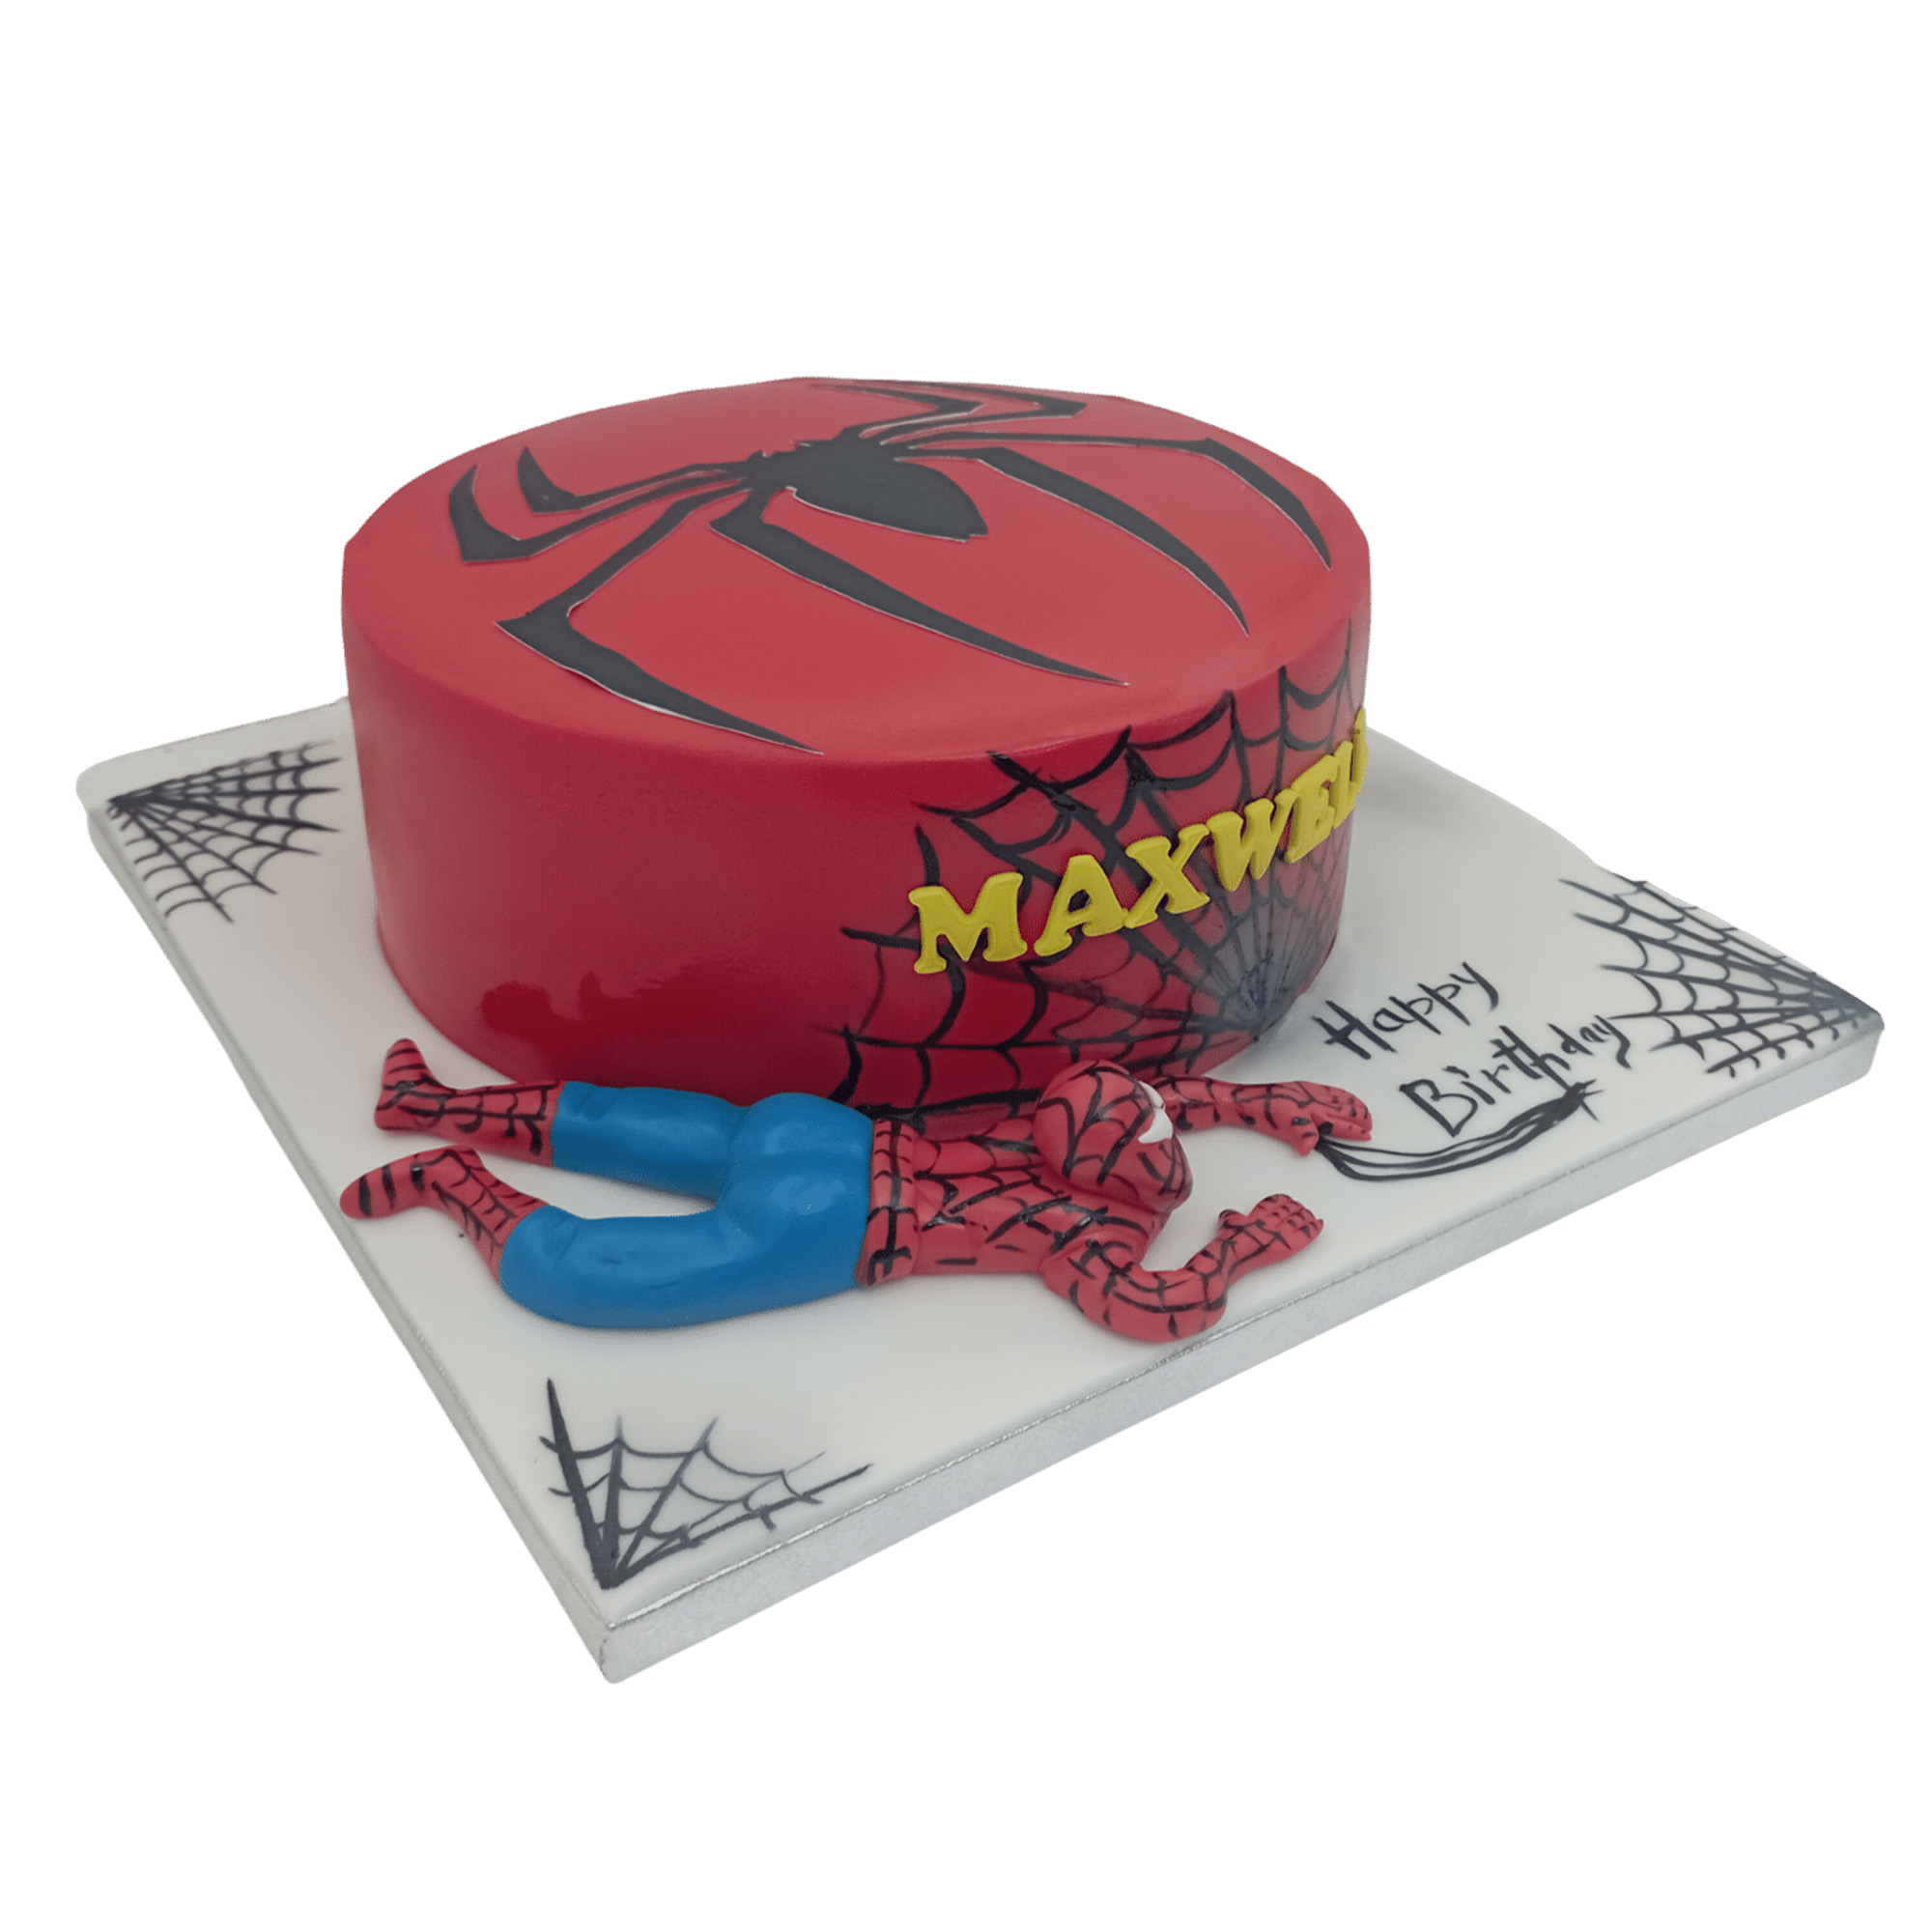 In Action Spiderman Birthday Cake